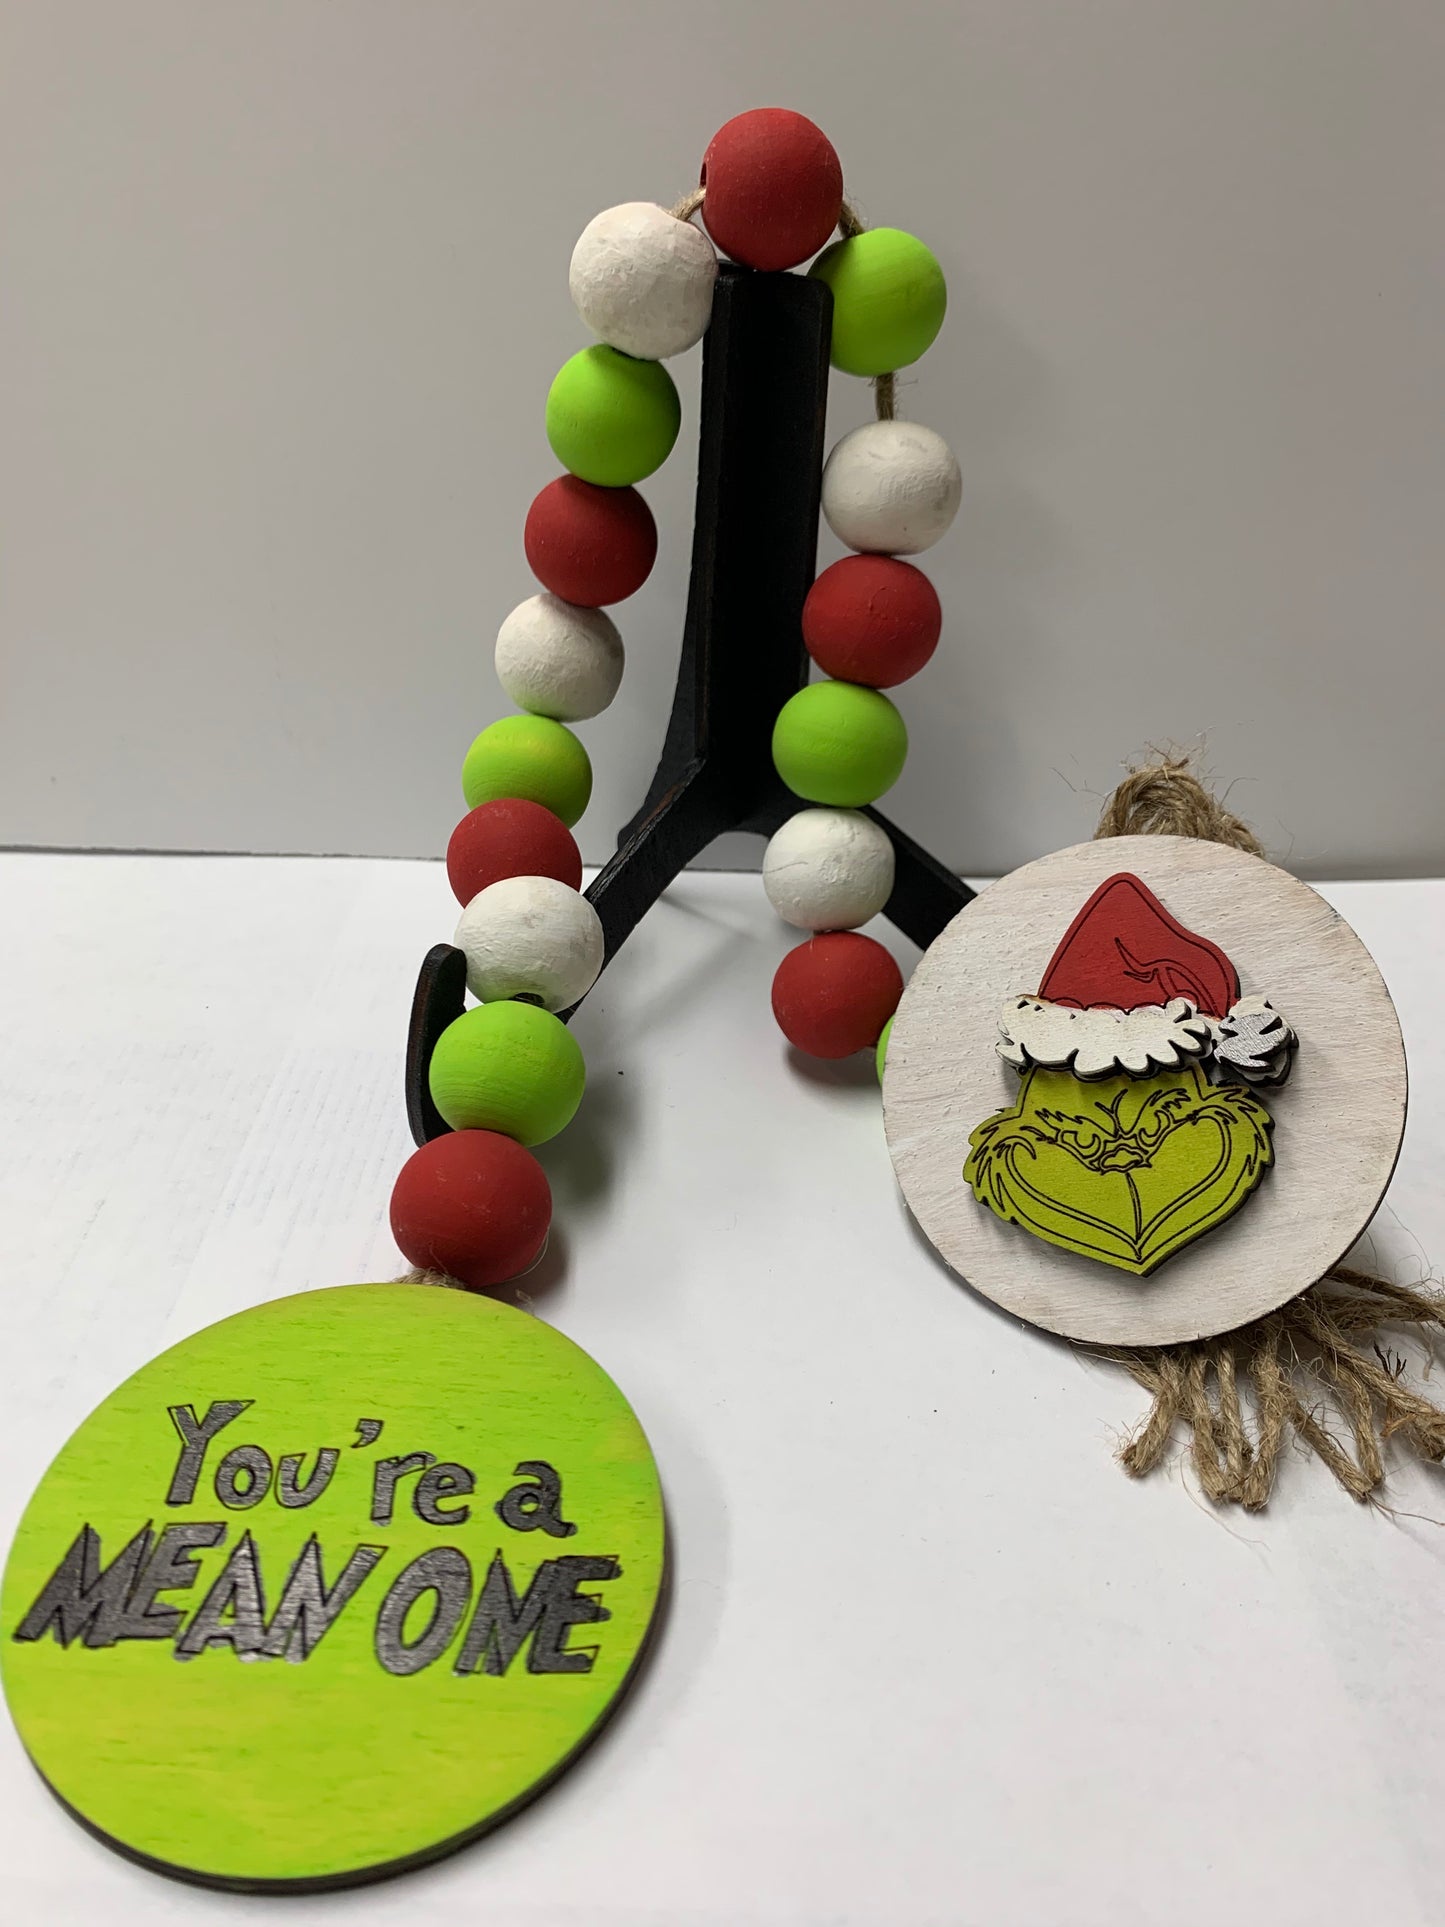 Mr. Grinch Tiered Tray Kit